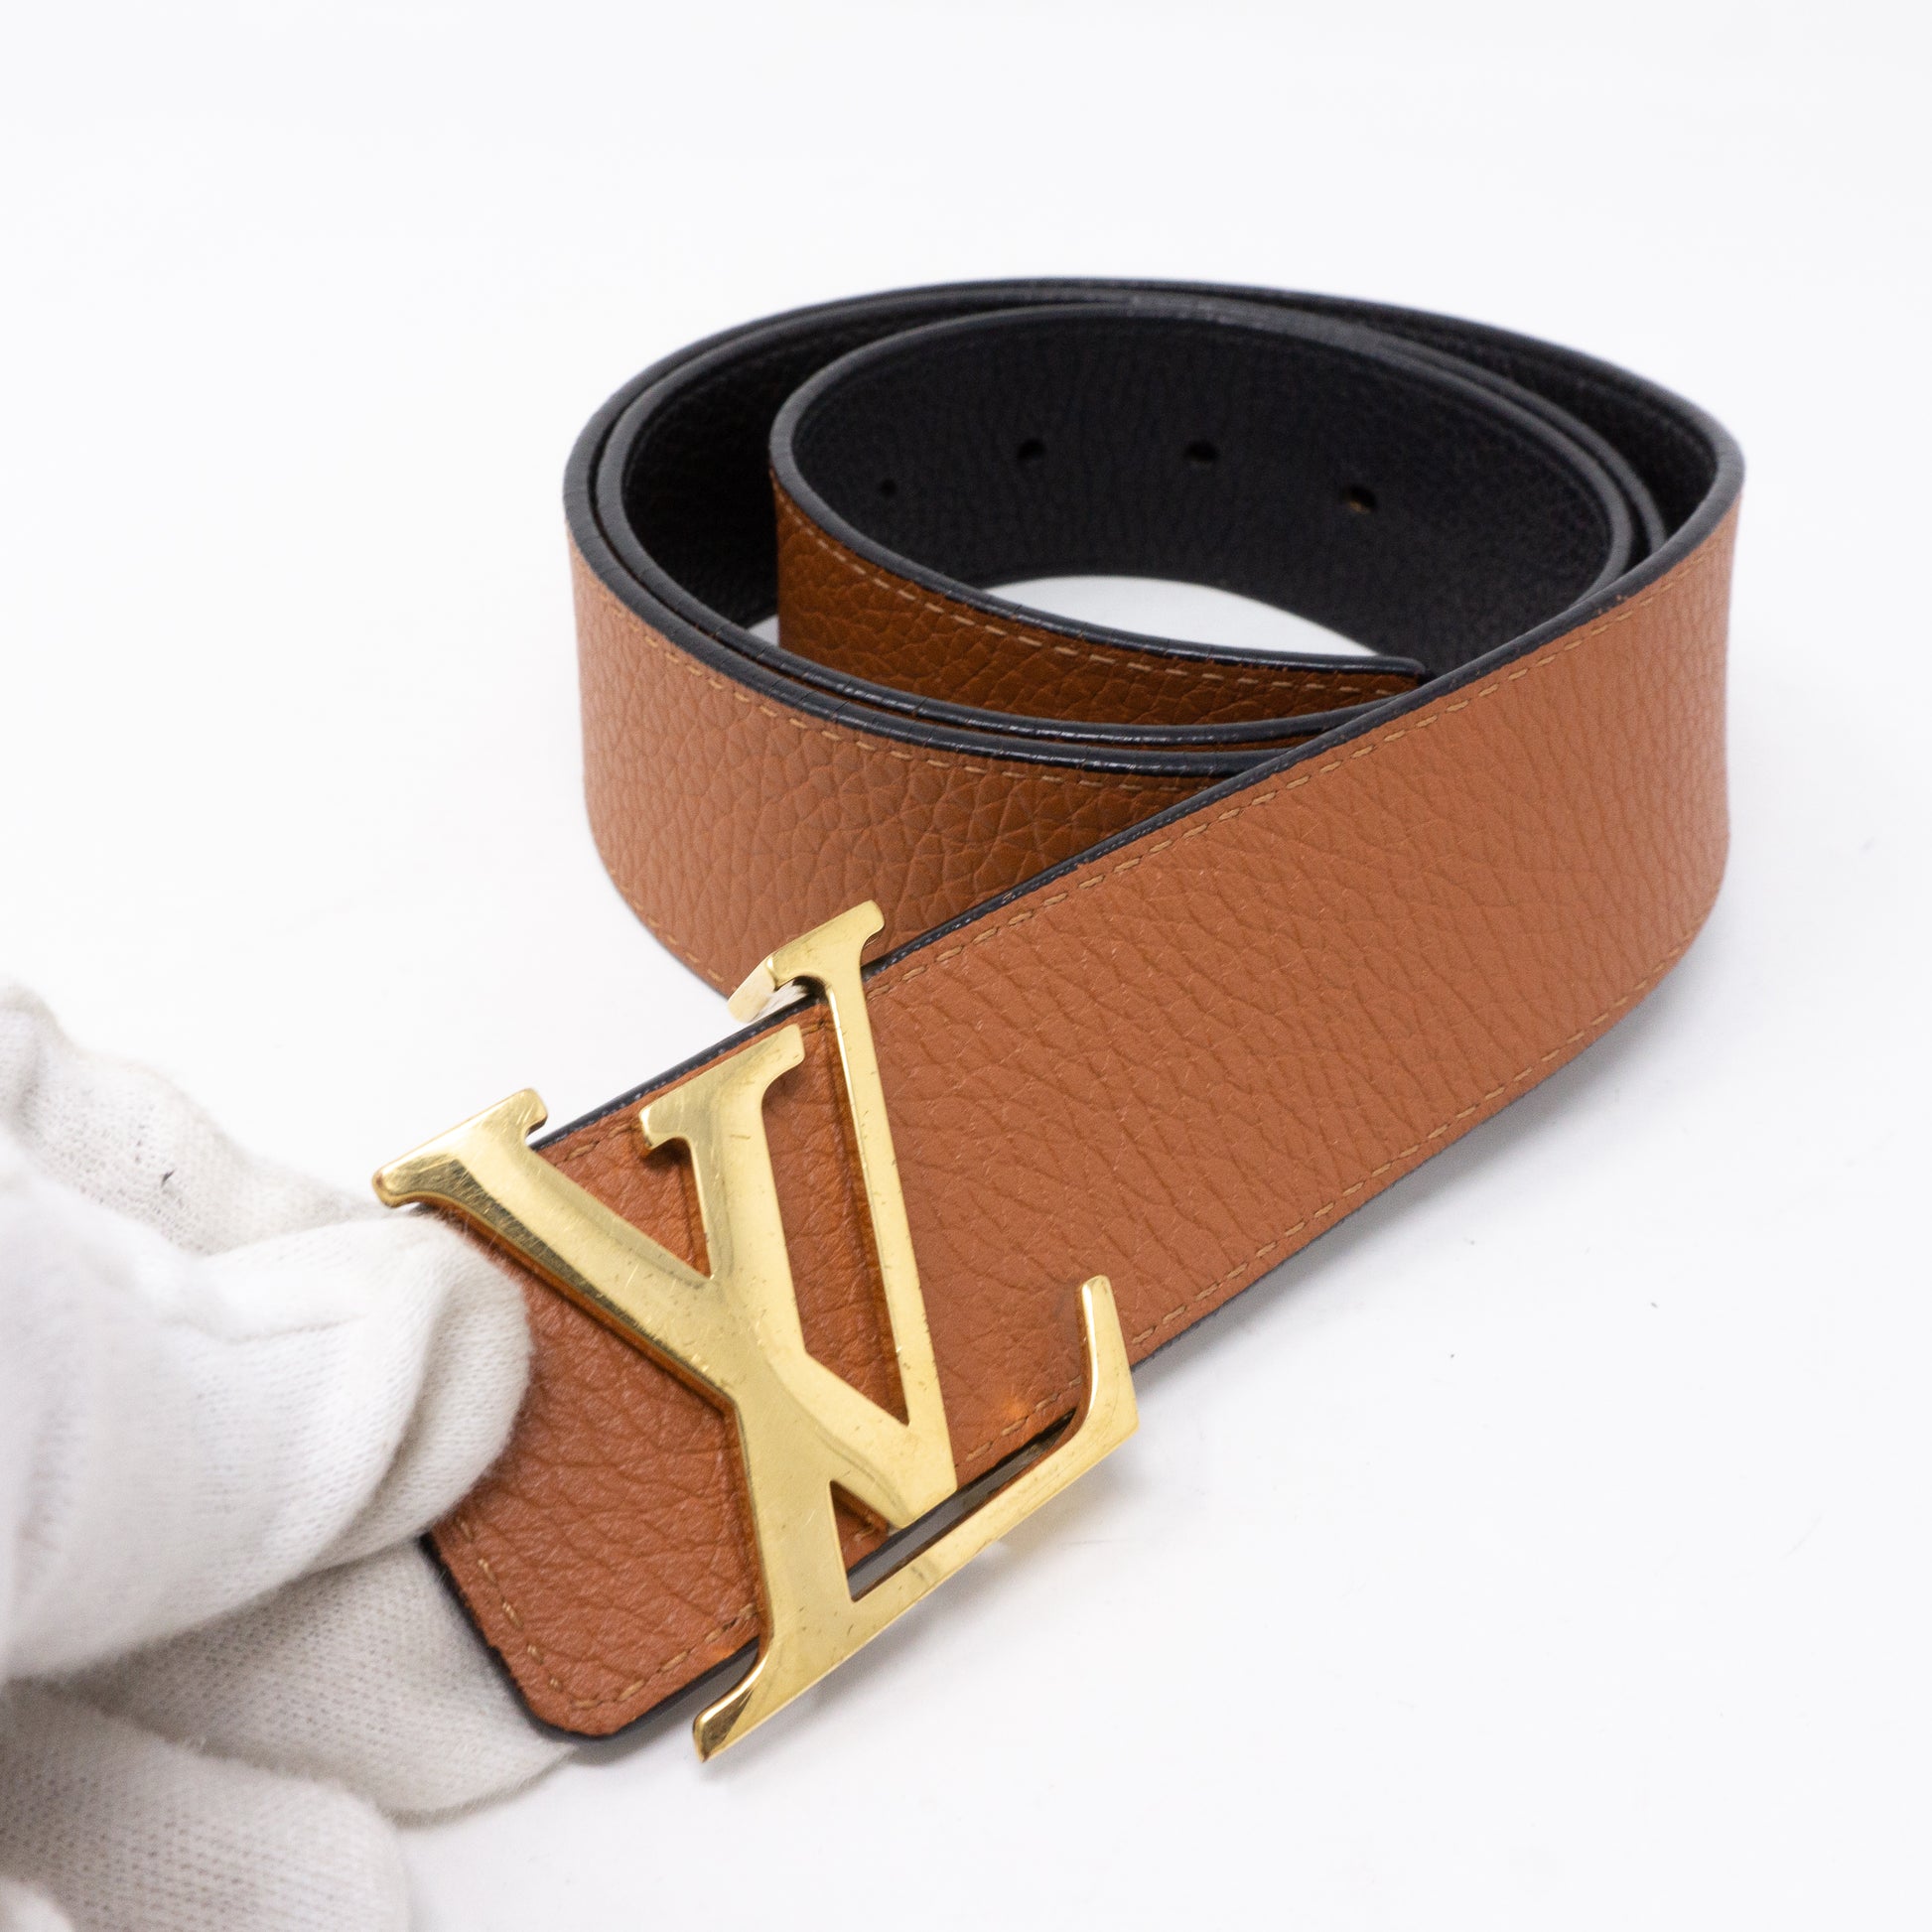 Initiales leather belt Louis Vuitton Black size 100 cm in Leather - 27729818